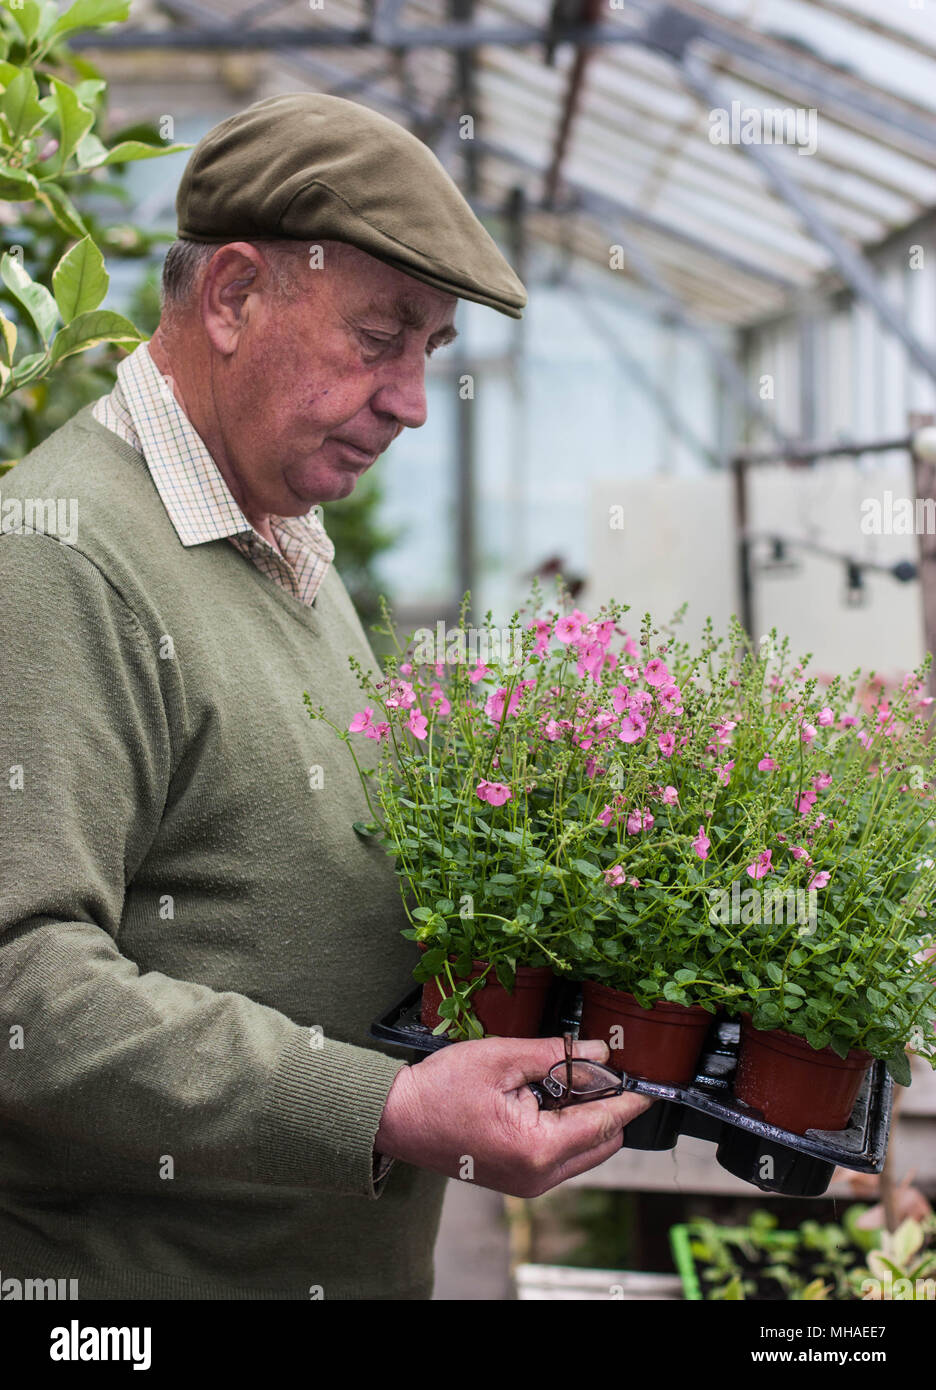 Professional gardener at work in the Greenhouse Stock Photo